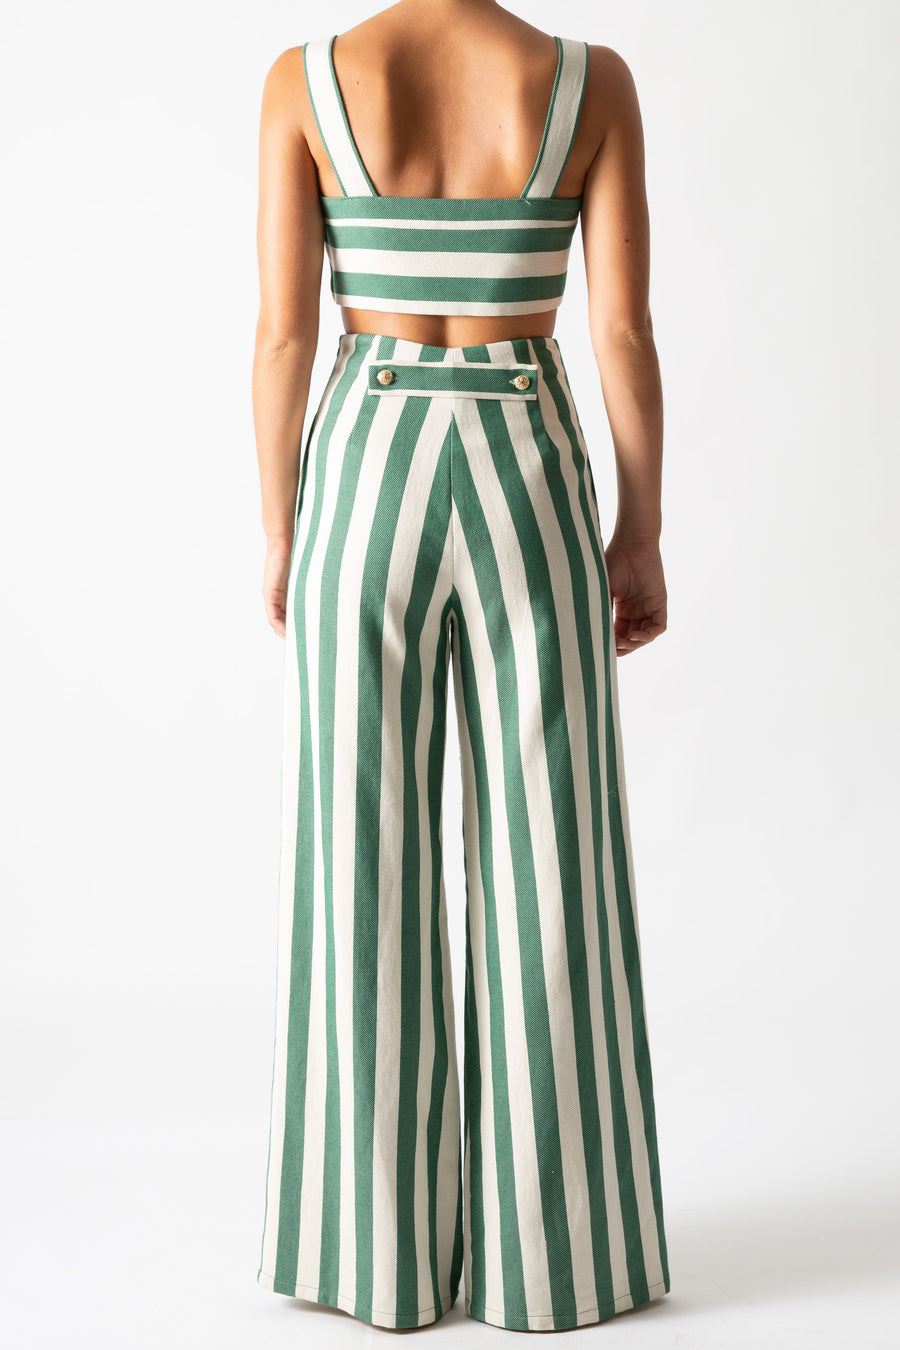 This is a back view photo of a woman wearing a matching two piece green striped set with gold buttons.  The pants are high waisted and long with a flare and the top is cropped with straps.